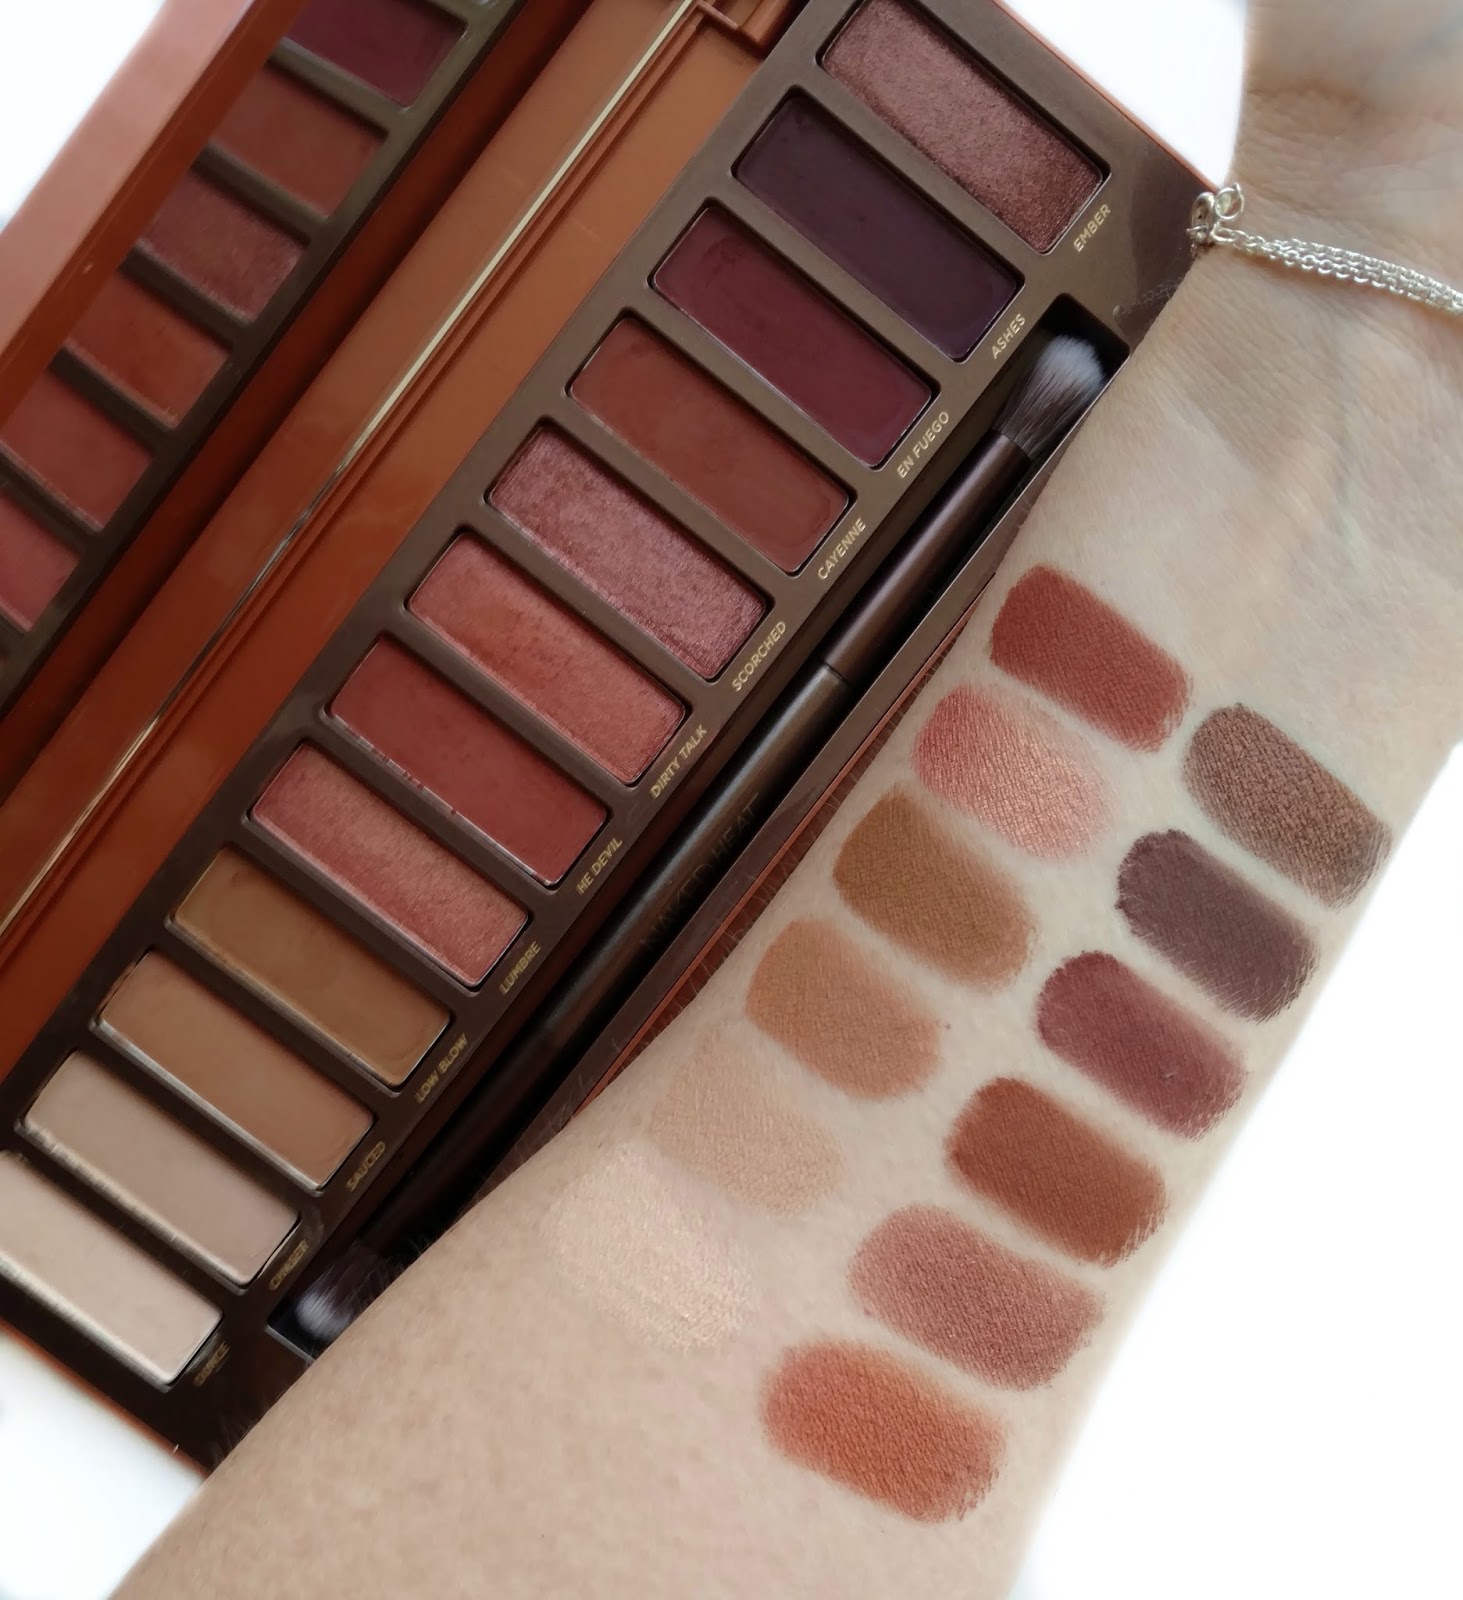 Urban Decay Naked Heat Palette - Swatches, Makeup Look 